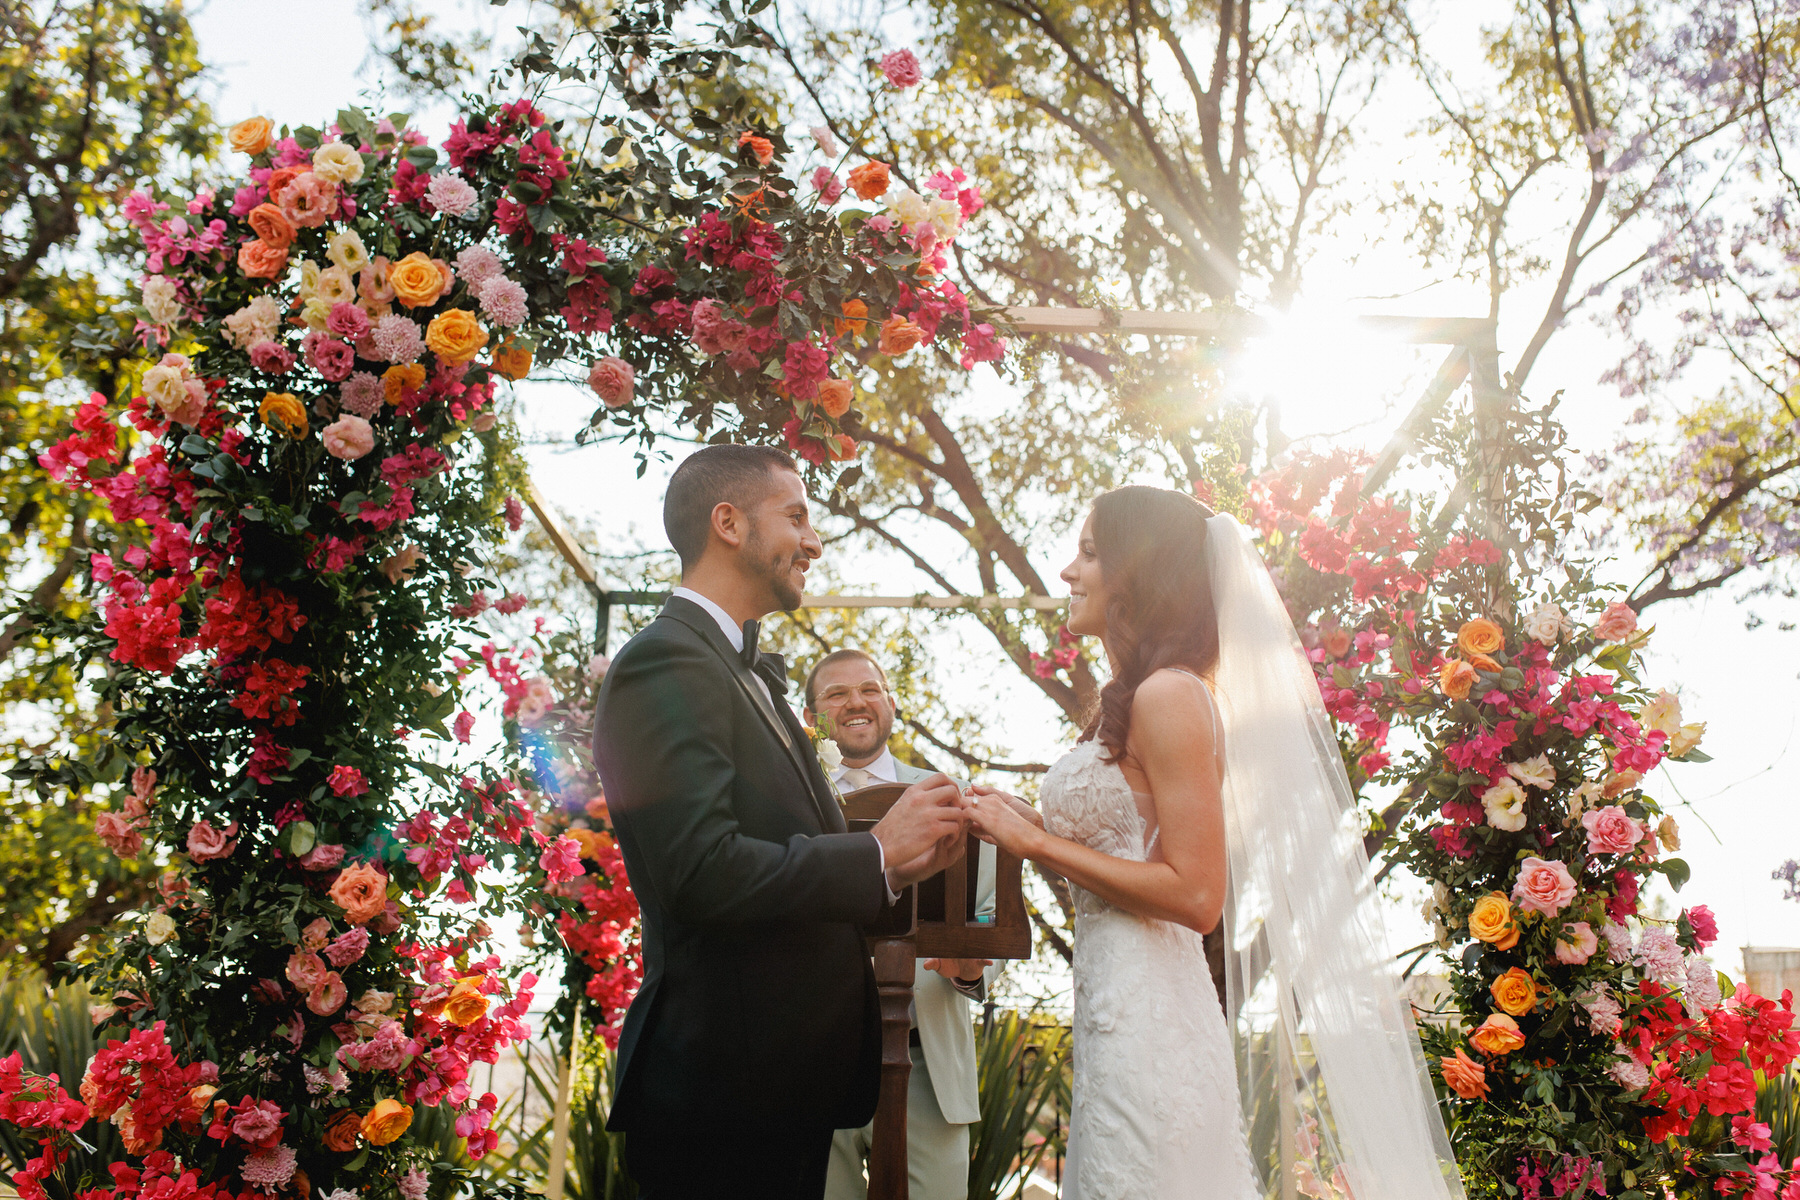 Outdoors wedding ceremony with beautiful florals